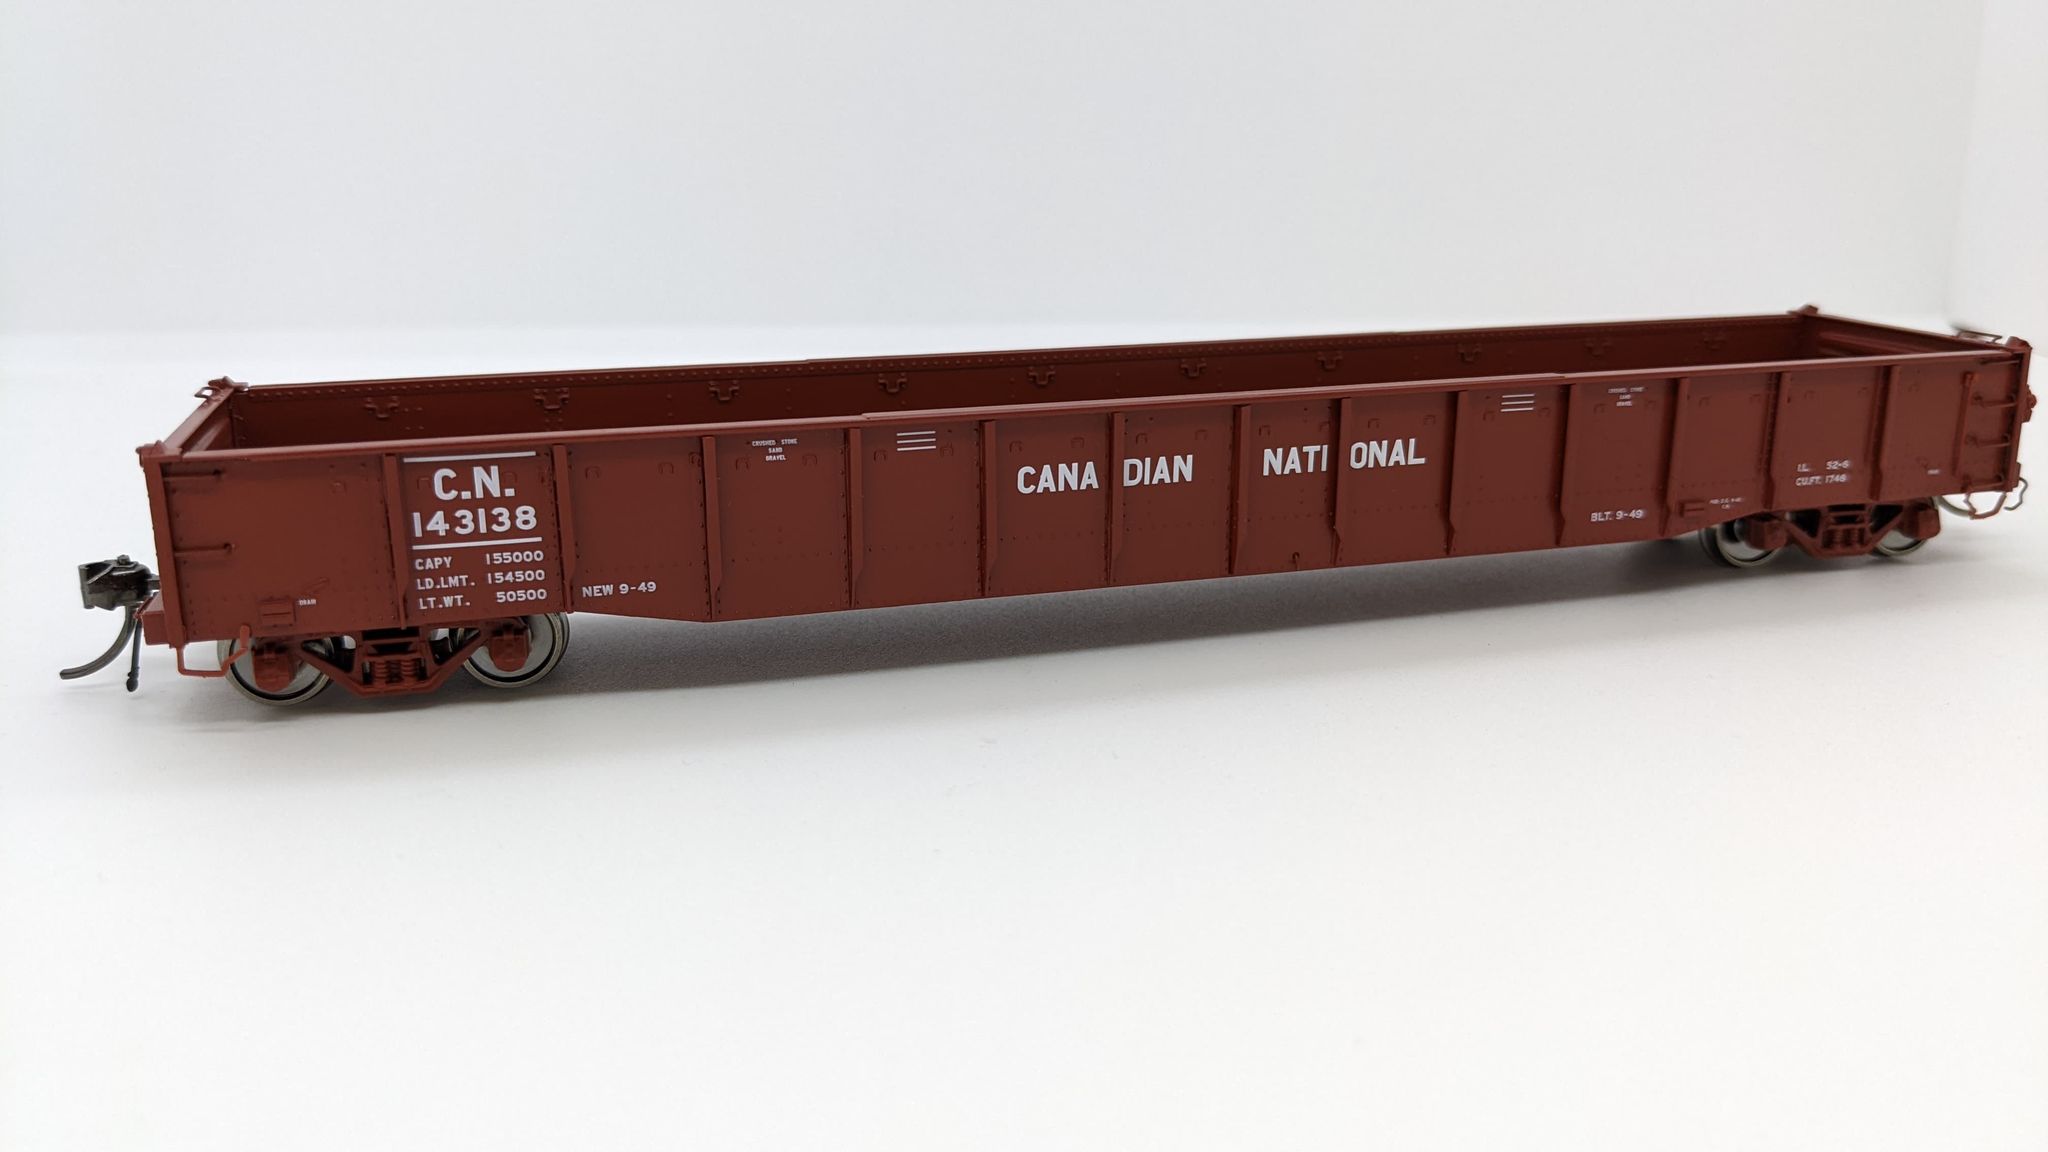 Rapido Trains 50048-2 - HO 52Ft 6In Mill Gondola: Canadian National - Delivery Scheme #143138